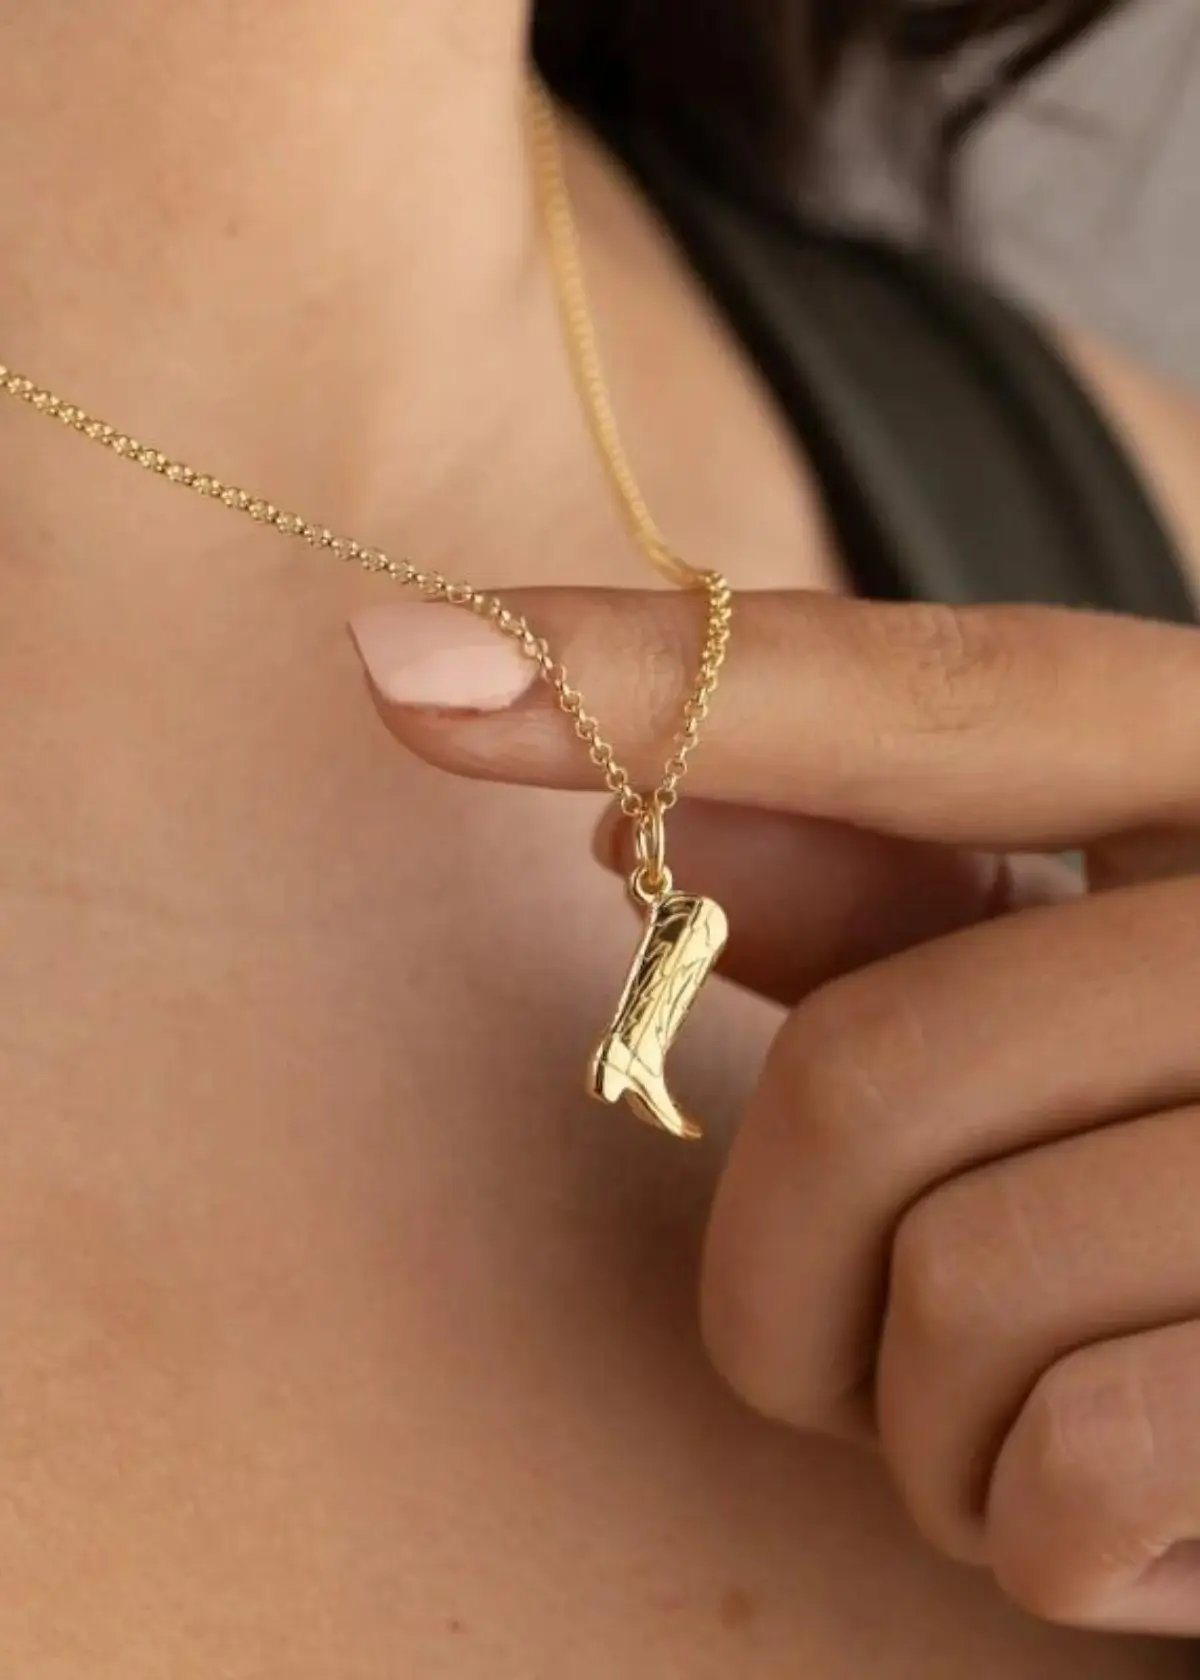 What is a Cowboy Boot Necklace?